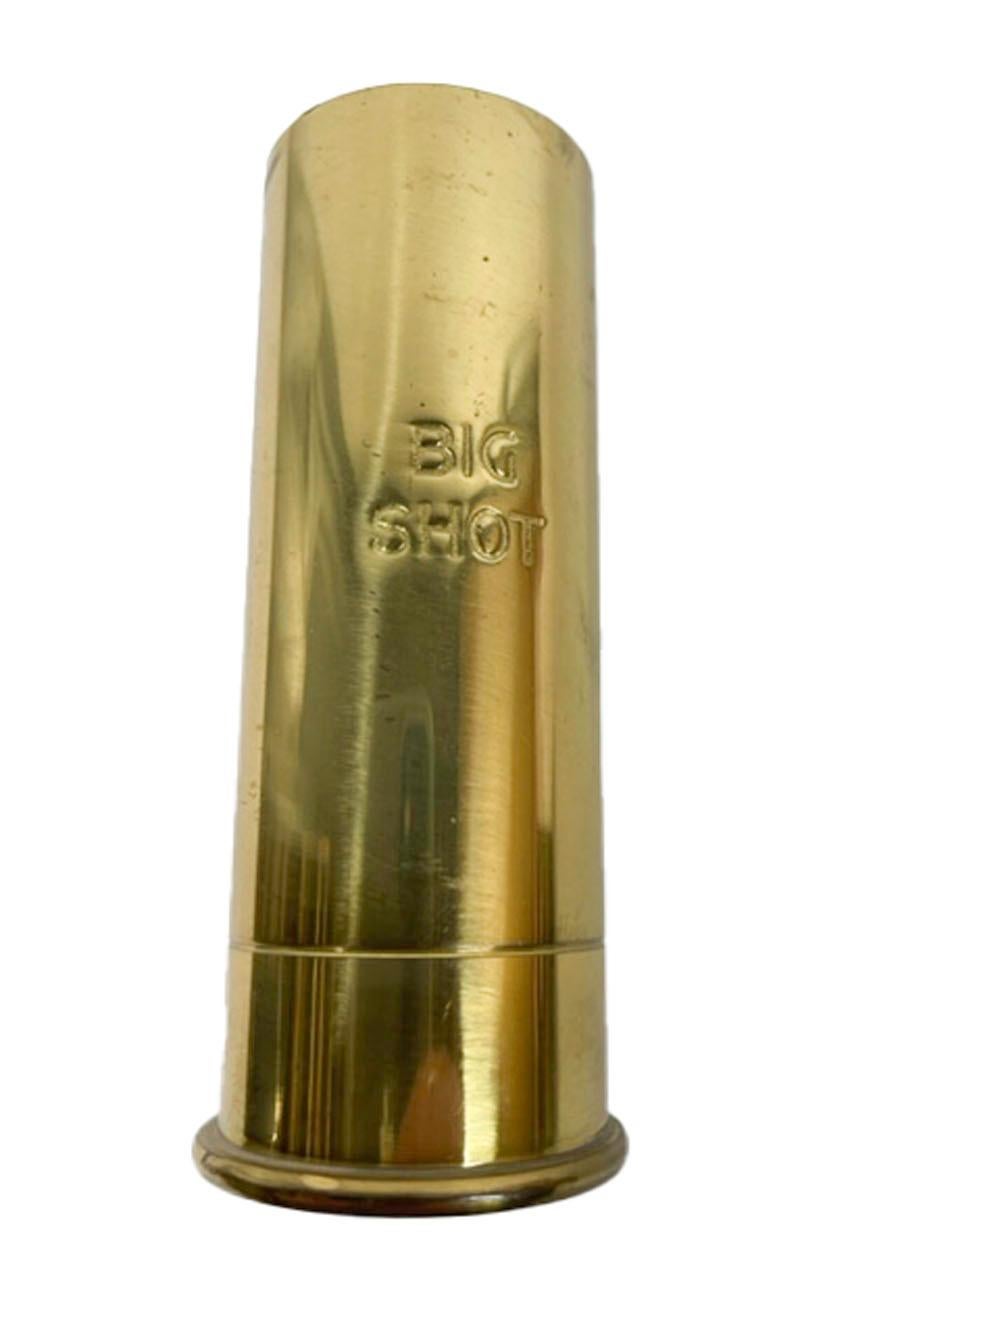 Pair of brass jiggers with removable plastic liners, in the form of shotgun shells one engraved 